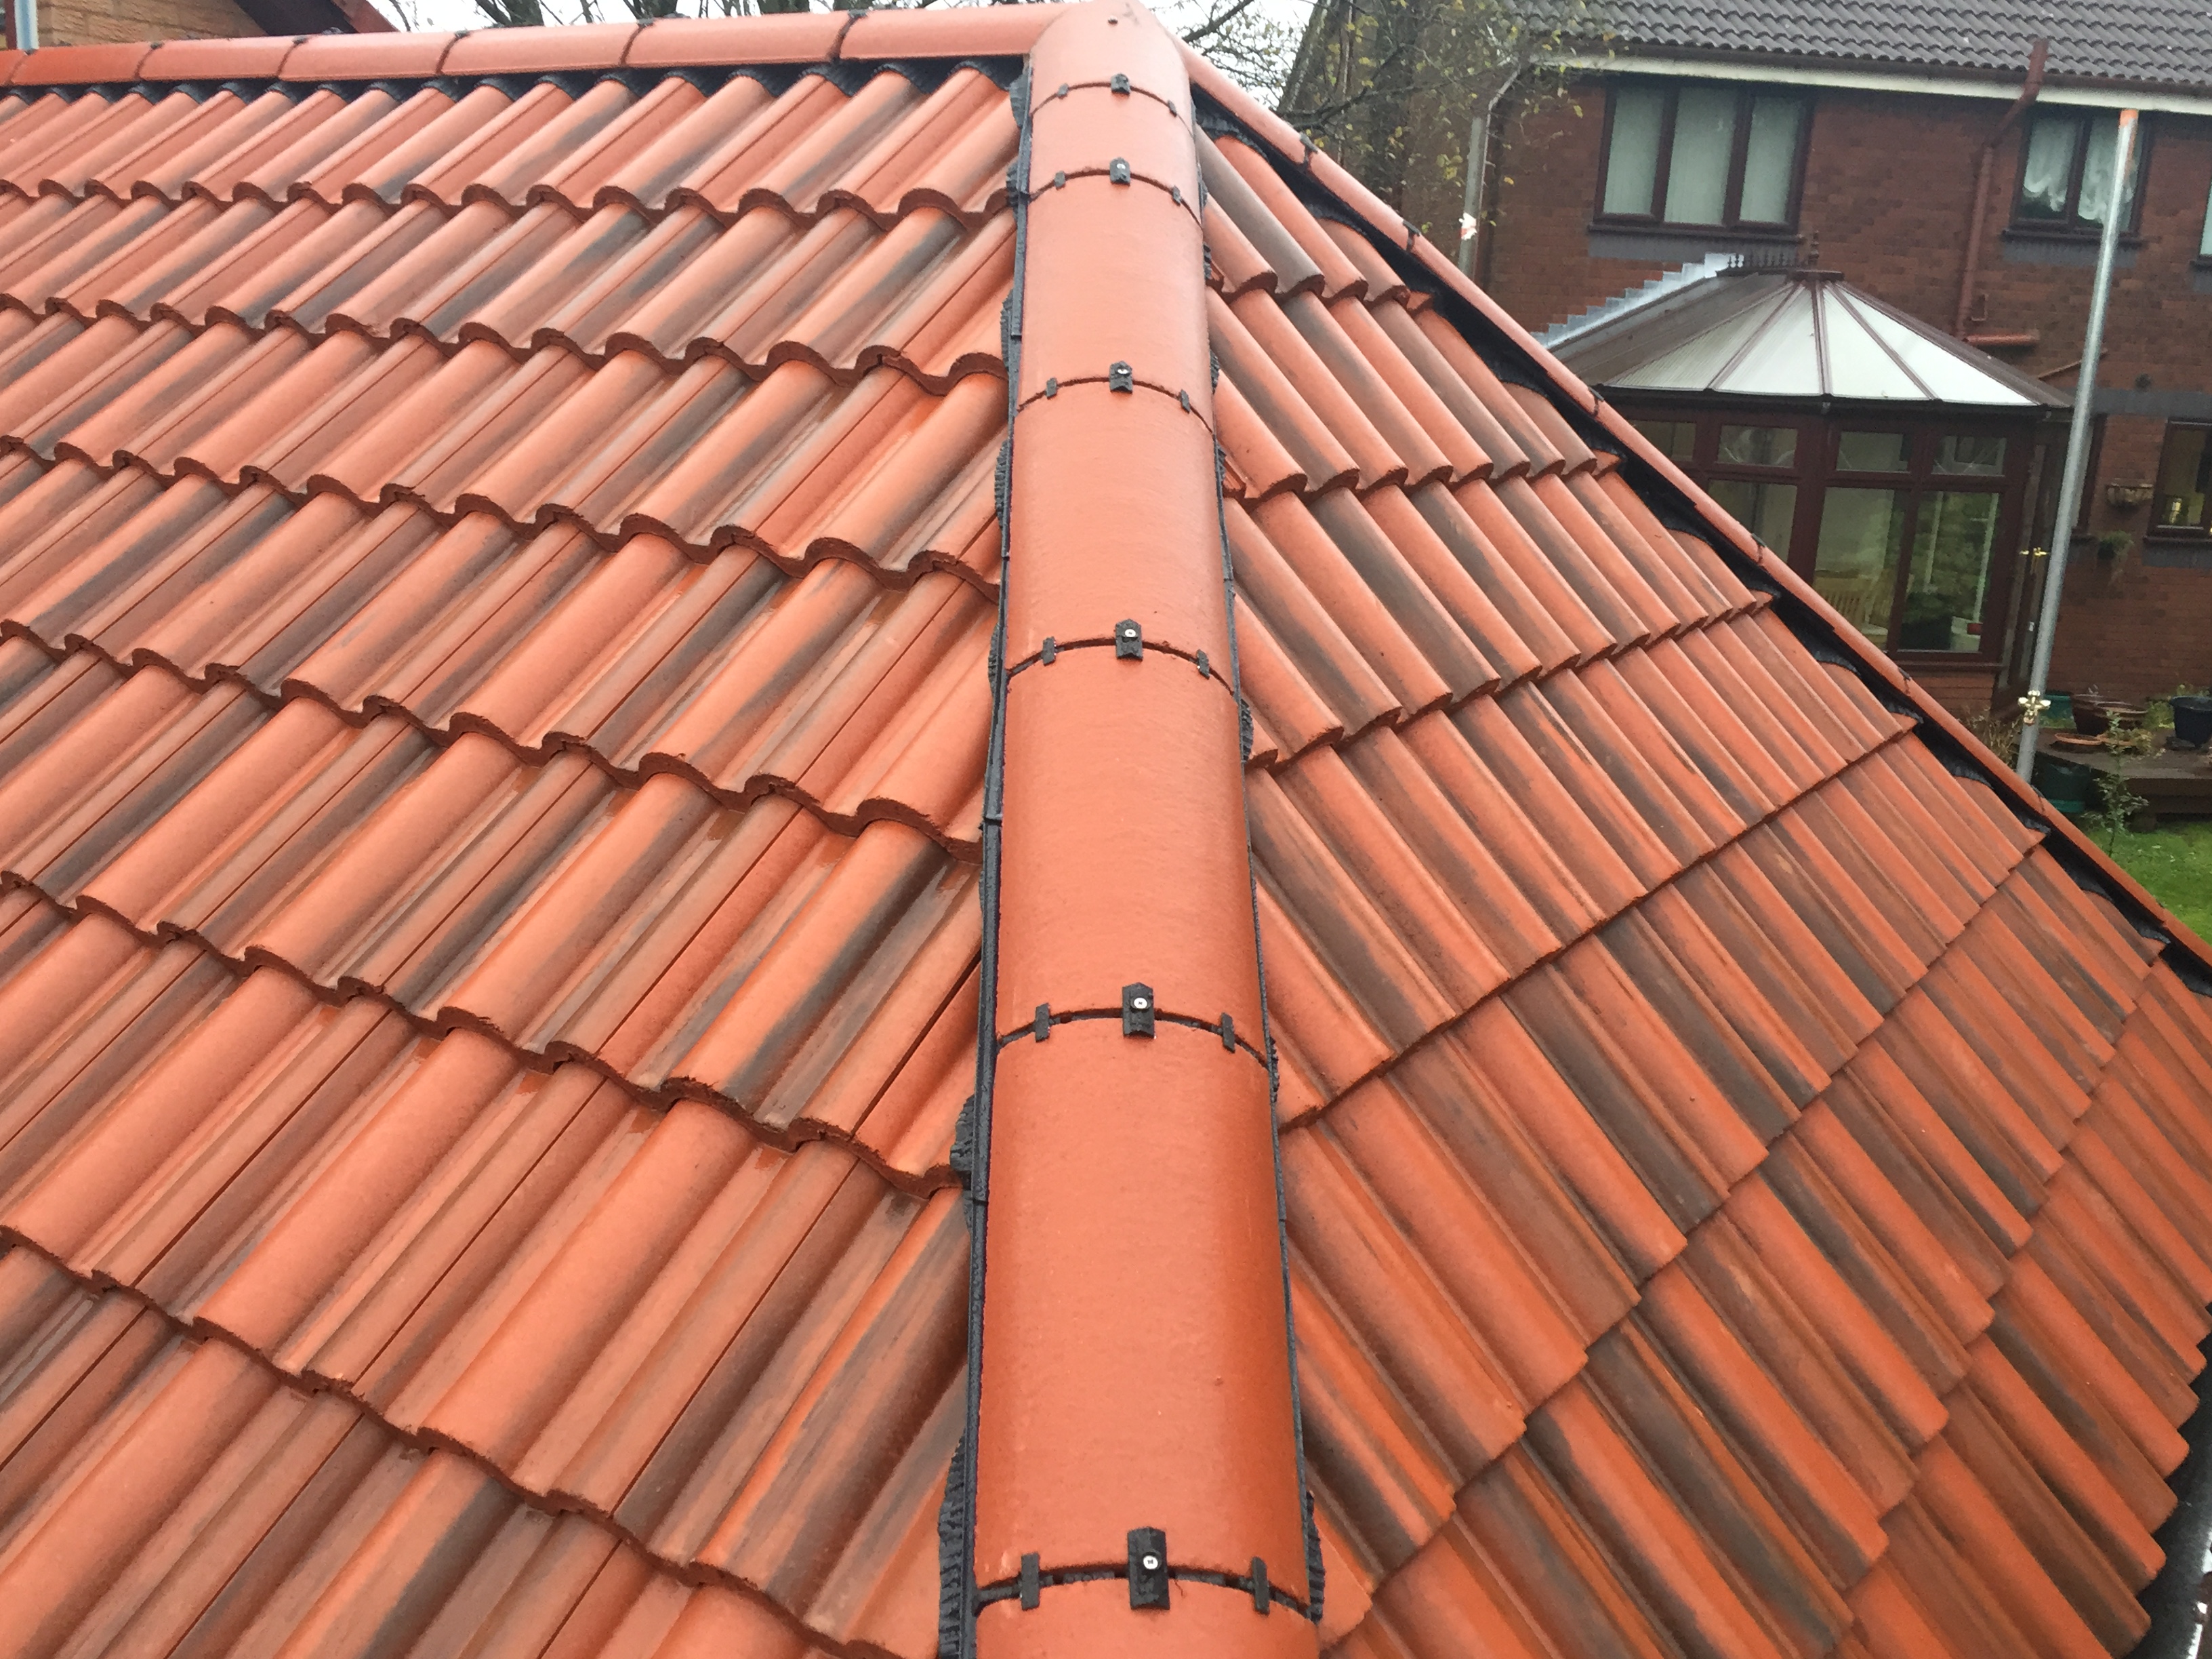 Expert Local Roofer  Specialising in Slating